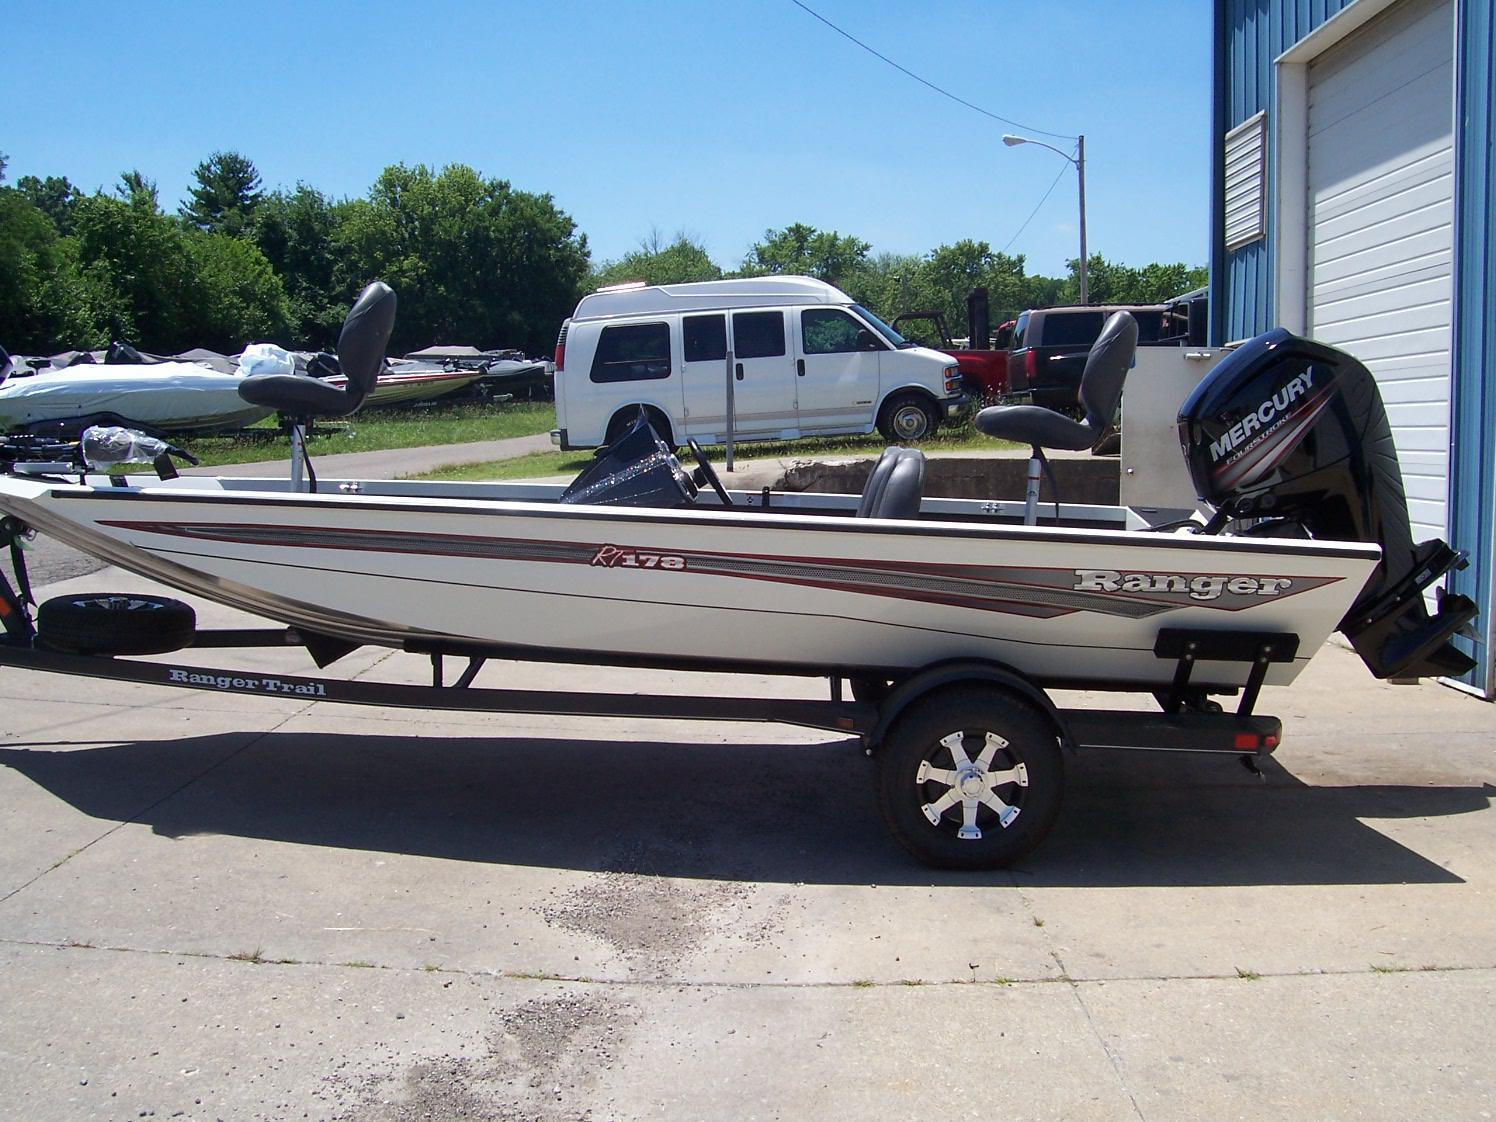 New Bass Ranger Rt178 boats for sale - boats.com